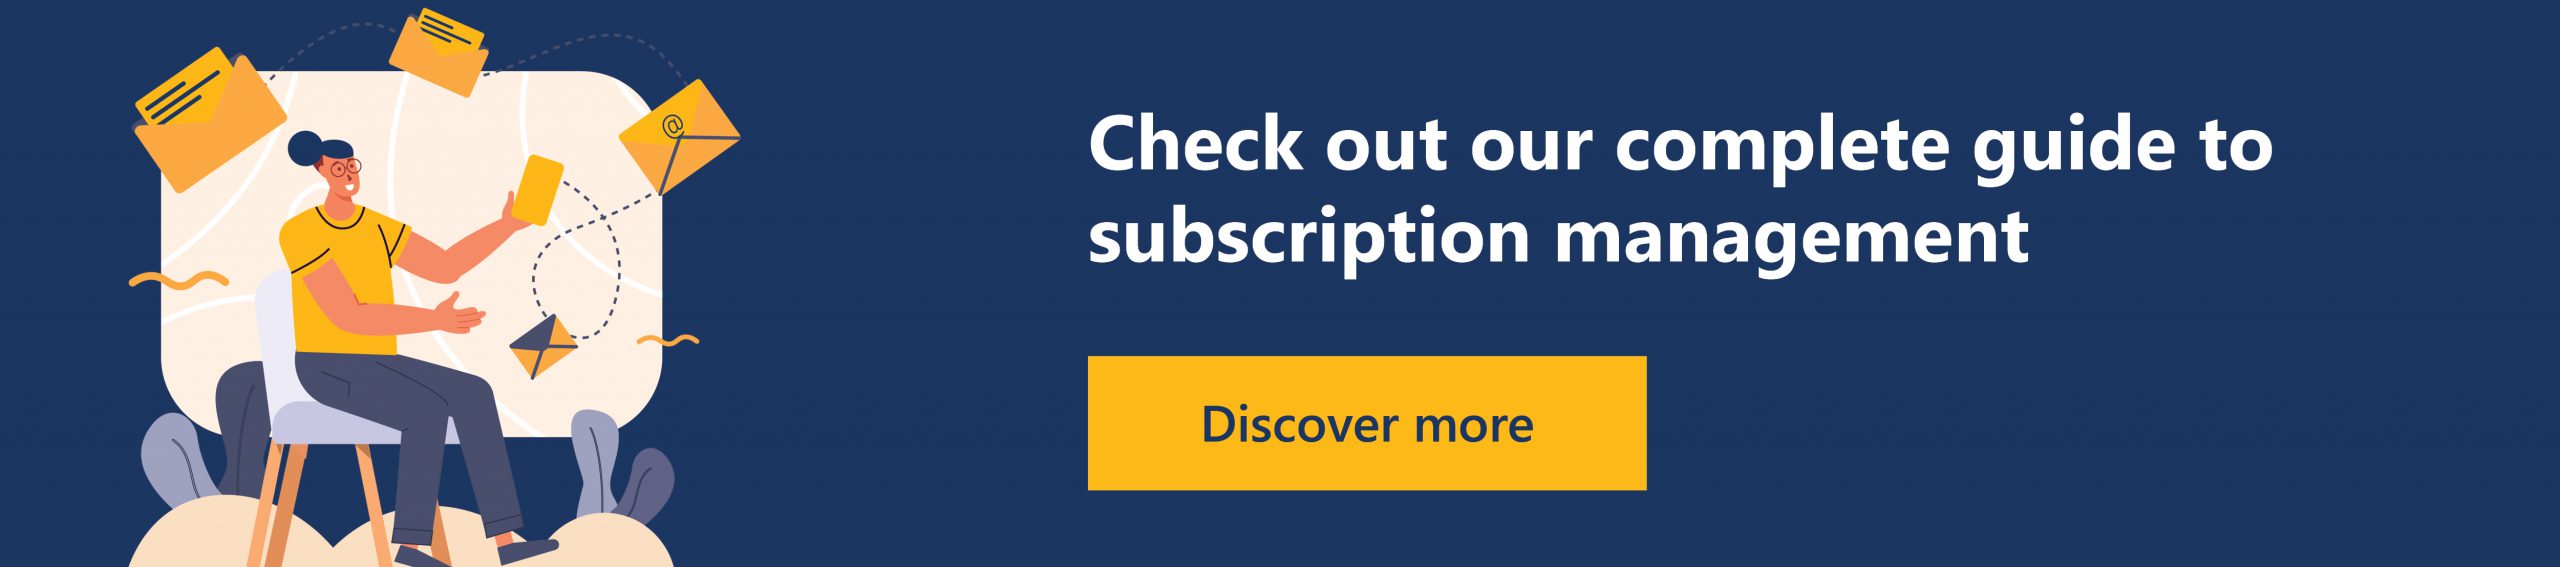 Check out our complete guide to subscription management